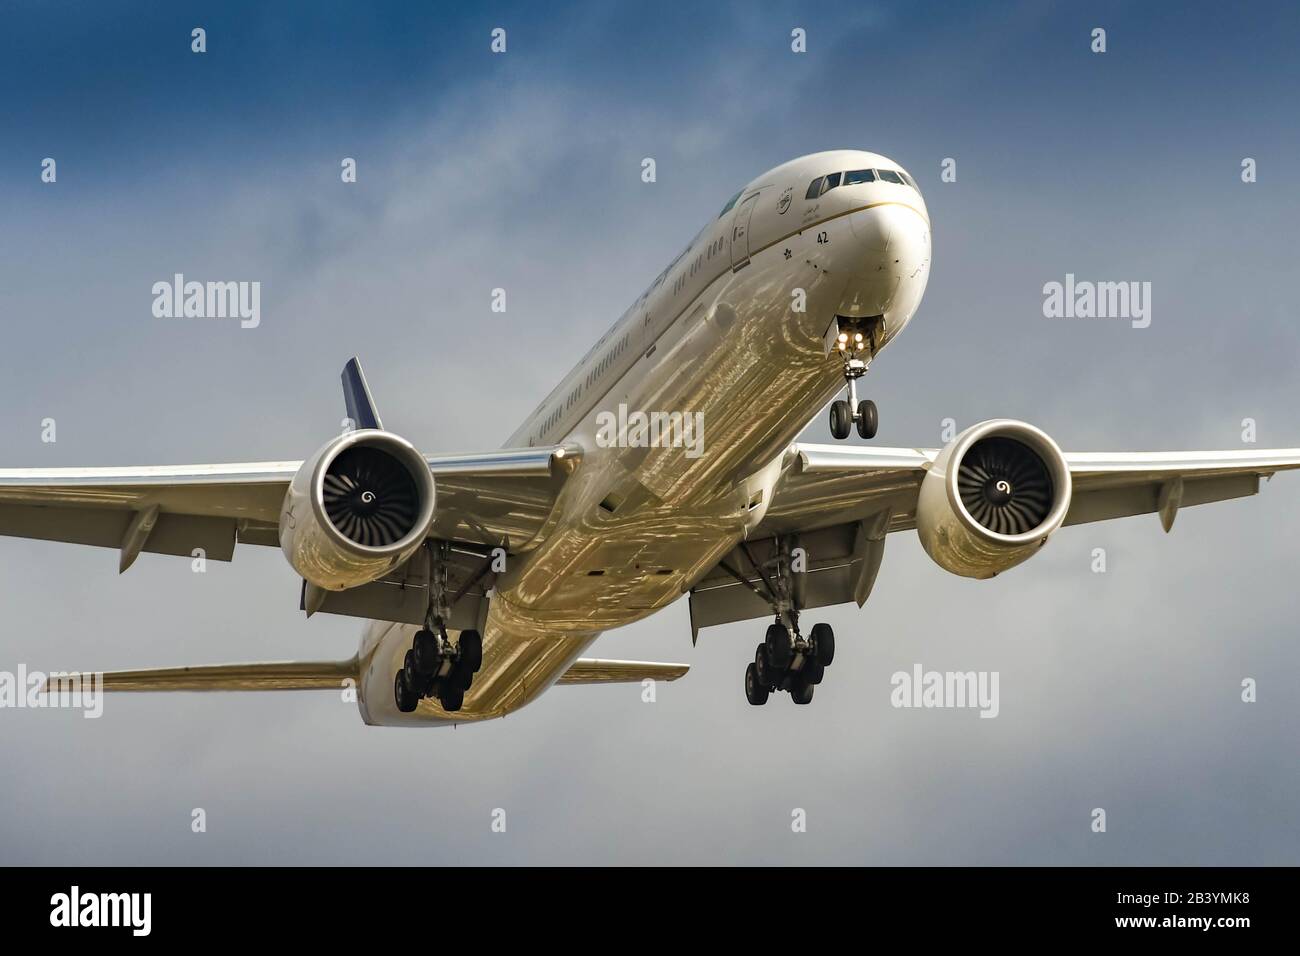 LONDON, ENGLAND - NOVEMBER 2018: Saudi Arabian Airlines Boeing 777 jet coming in to land at London Heathrow Airport. Stock Photo